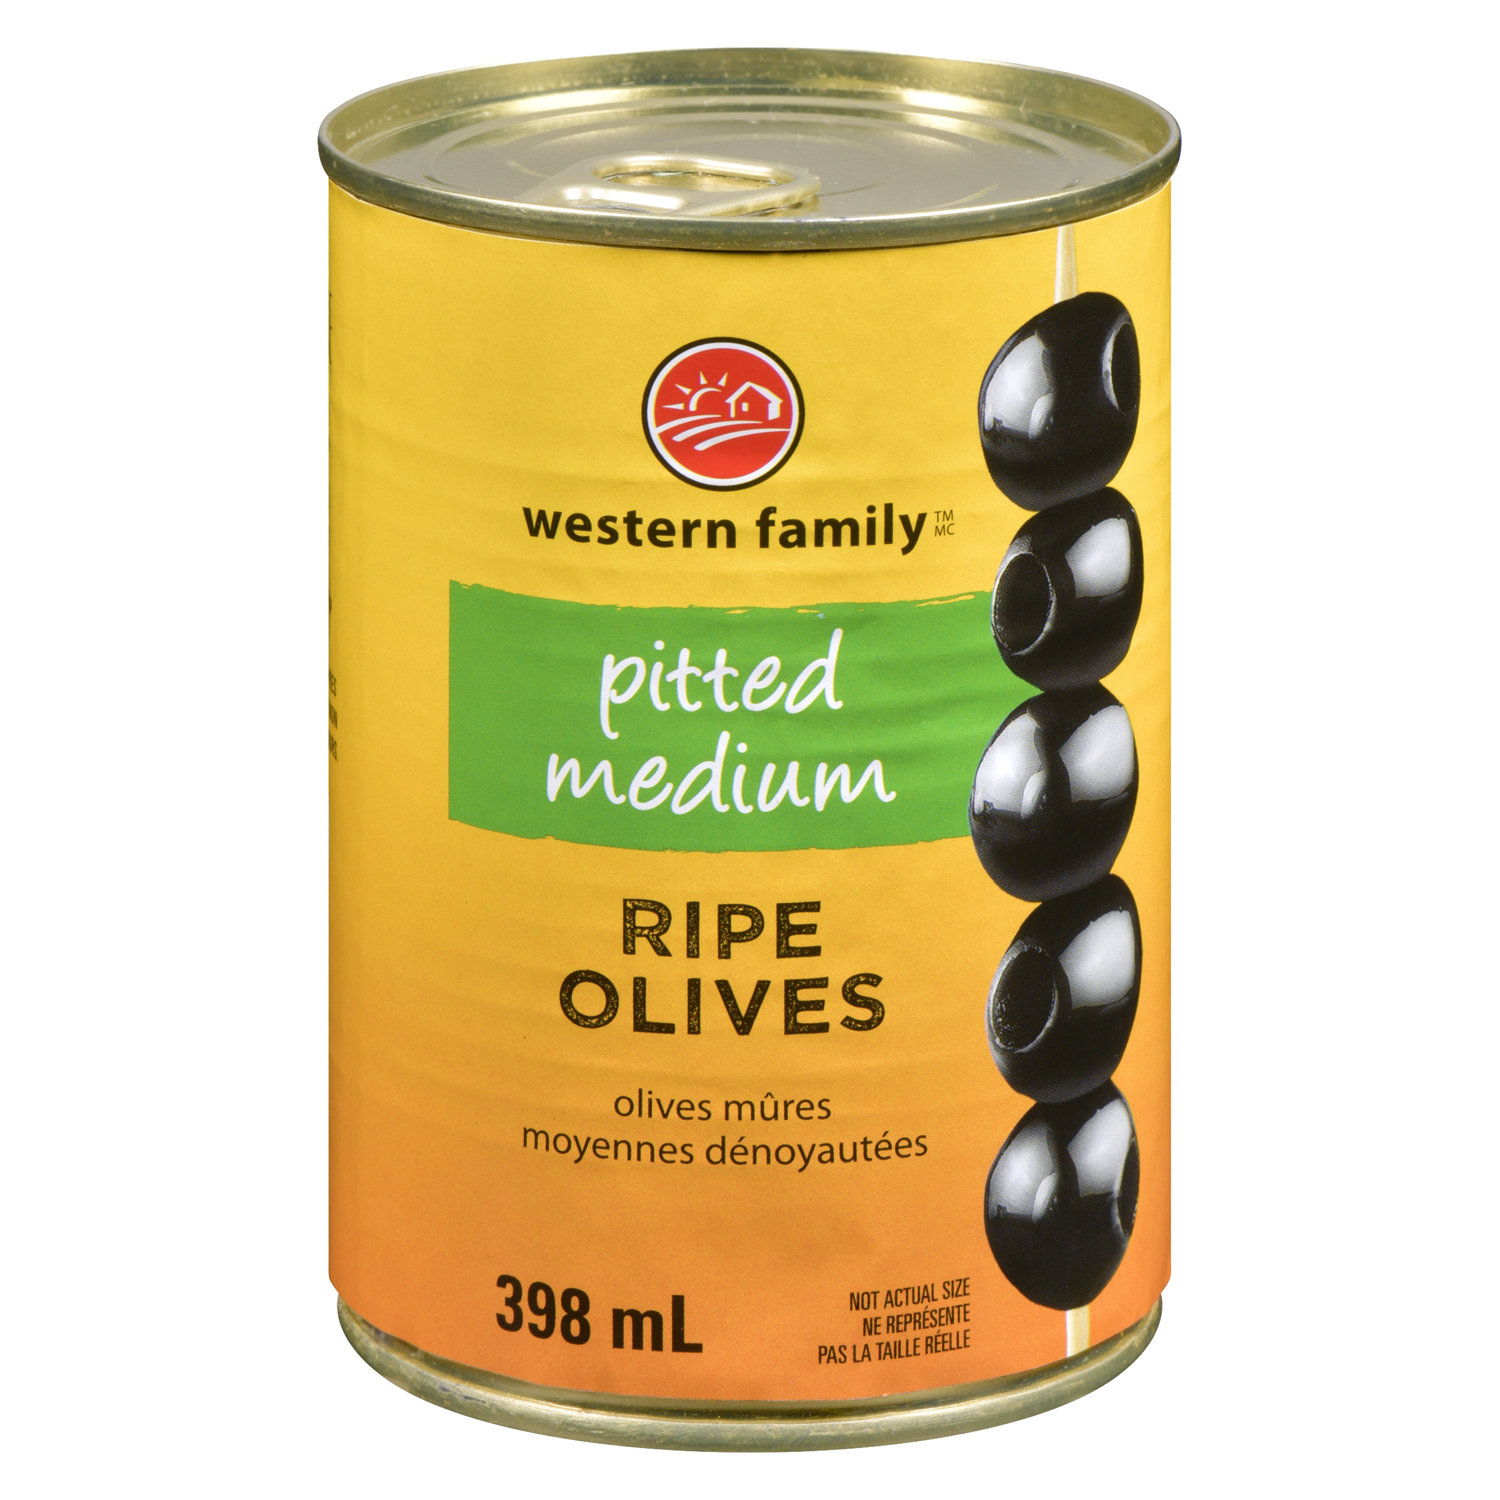 Western Family - Black Ripe Olives, Pitted Medium - Save-On-Foods